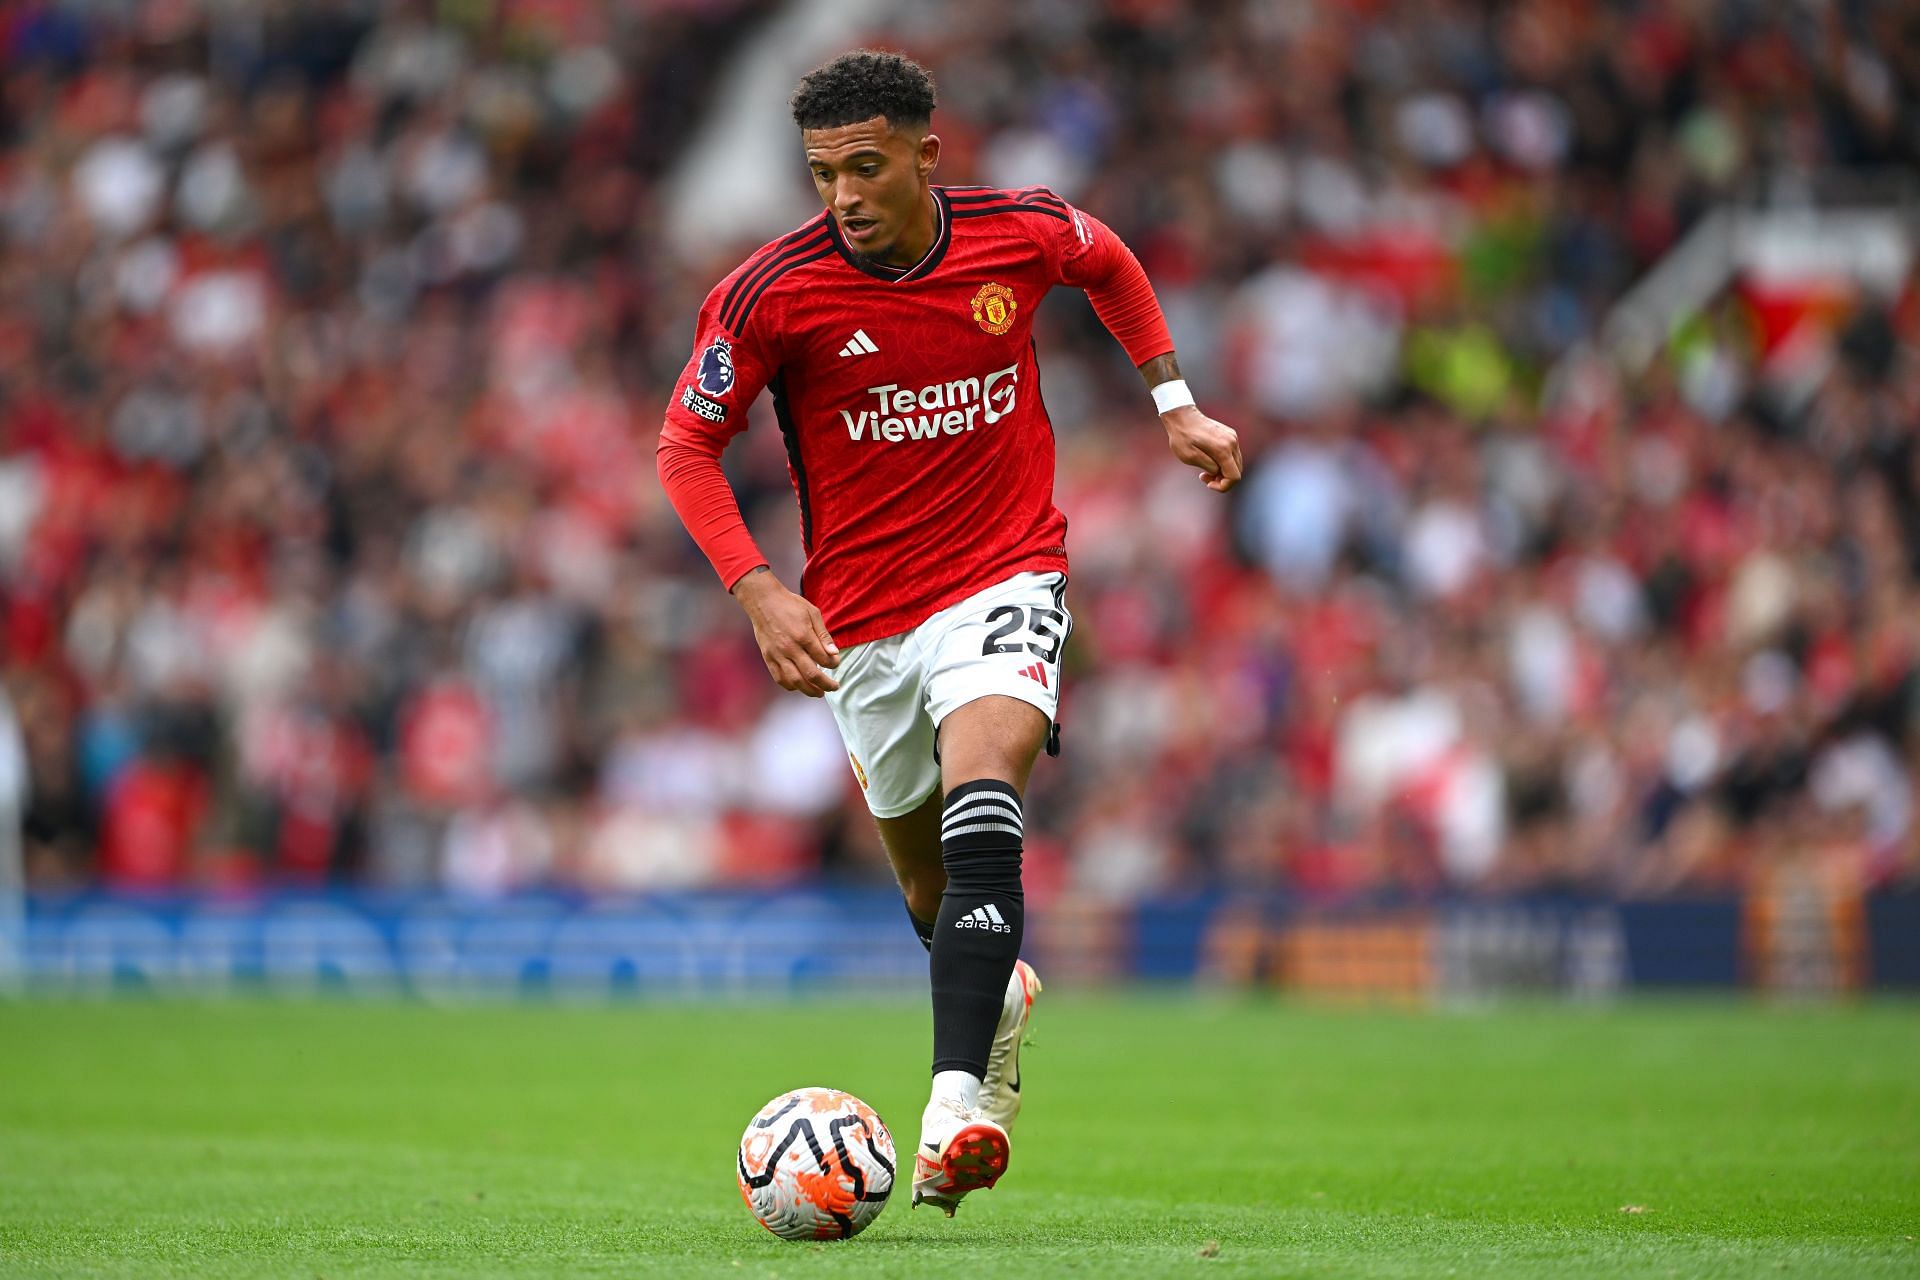 Jadon Sancho is expected to leave Old Trafford in January